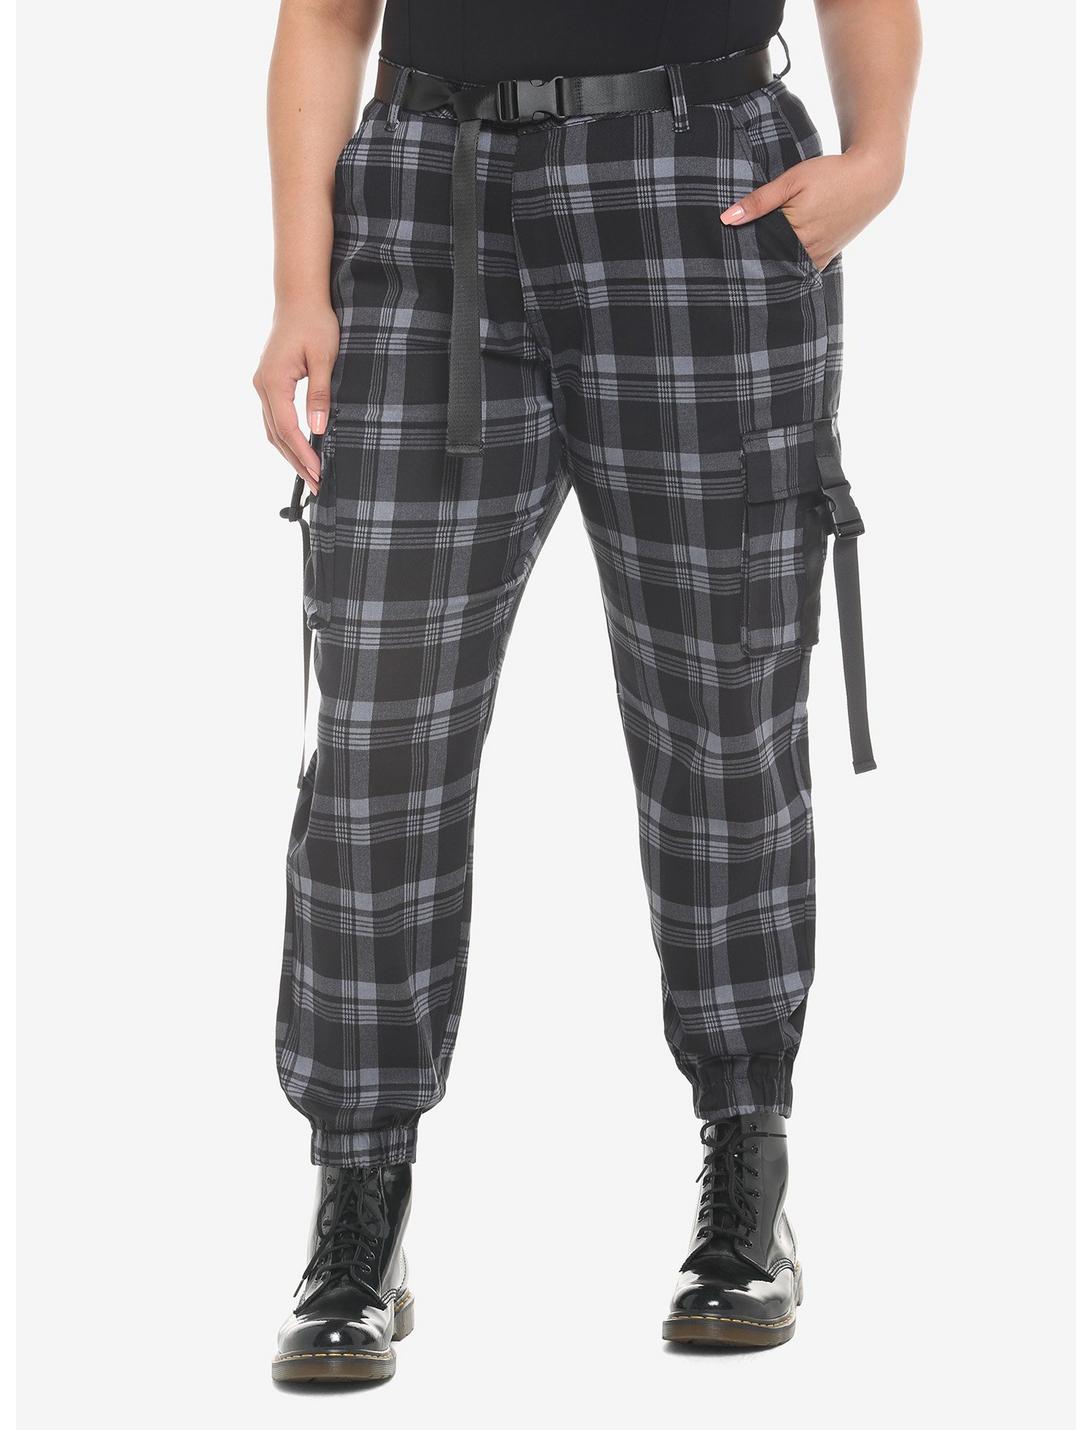 Grey Plaid Jogger Pants With Buckles Plus Size, GREY, hi-res